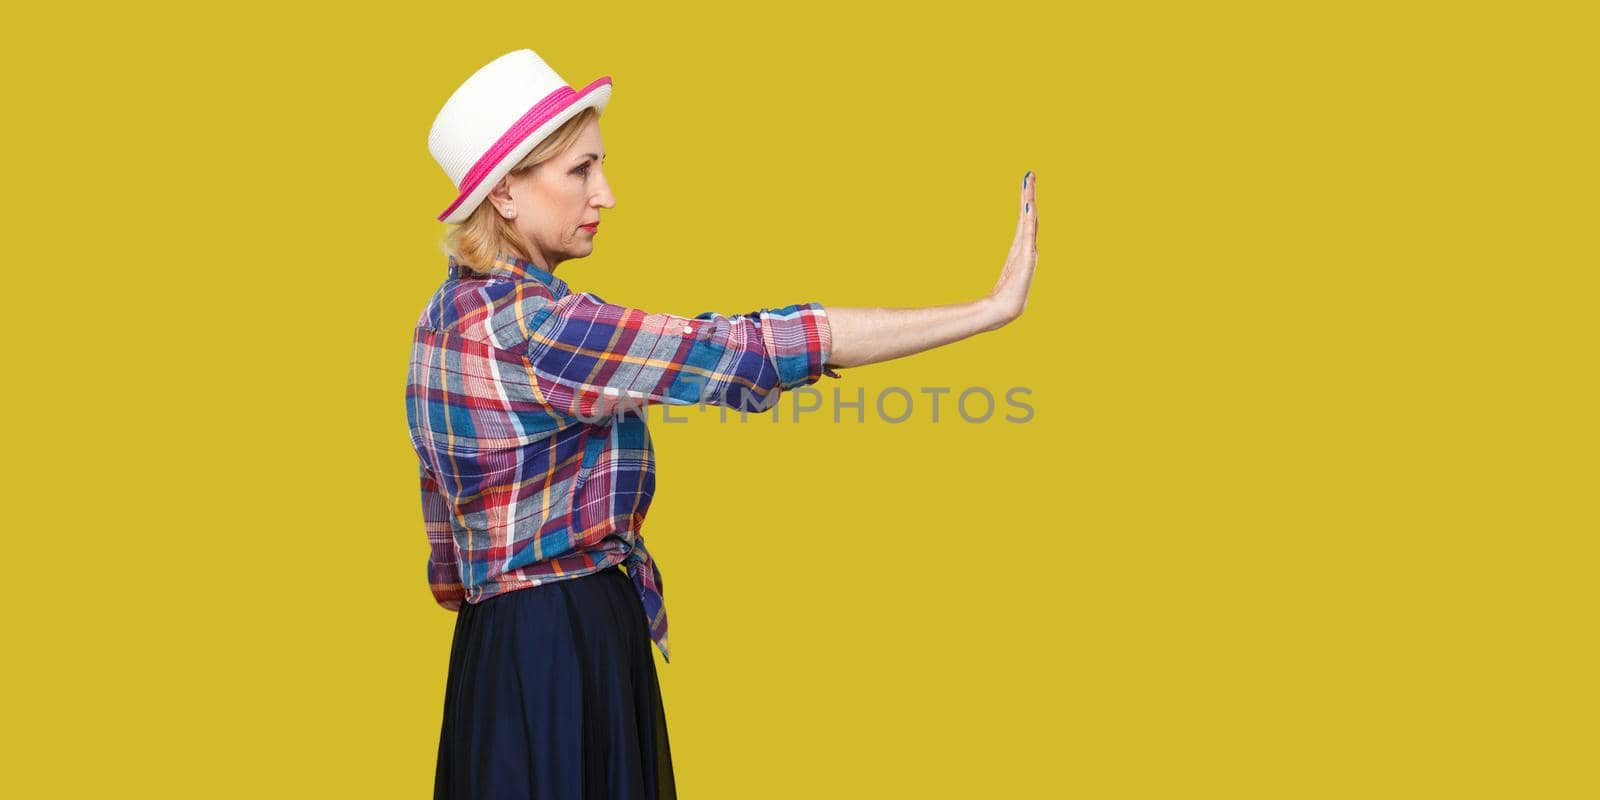 Stylish middle aged woman in casual style on yellow background by Khosro1